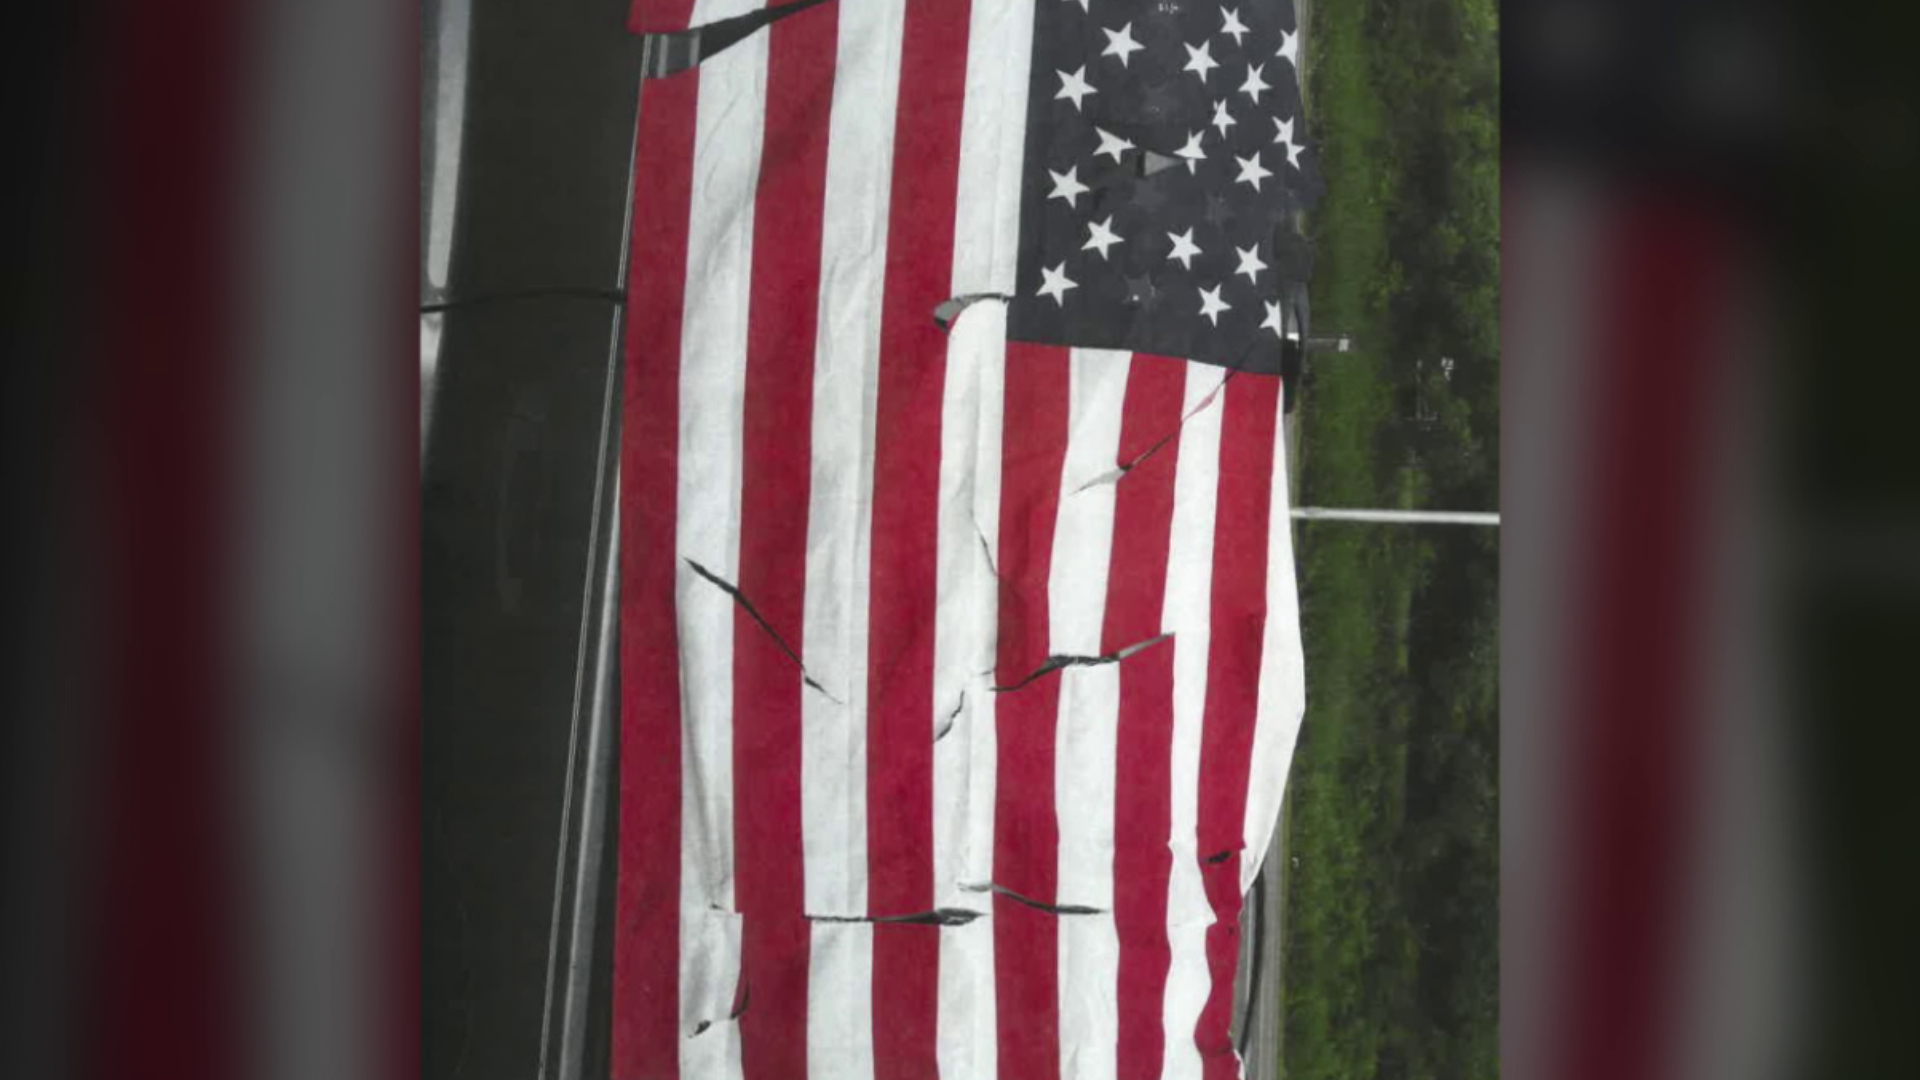 The flag was stolen and then found destroyed.